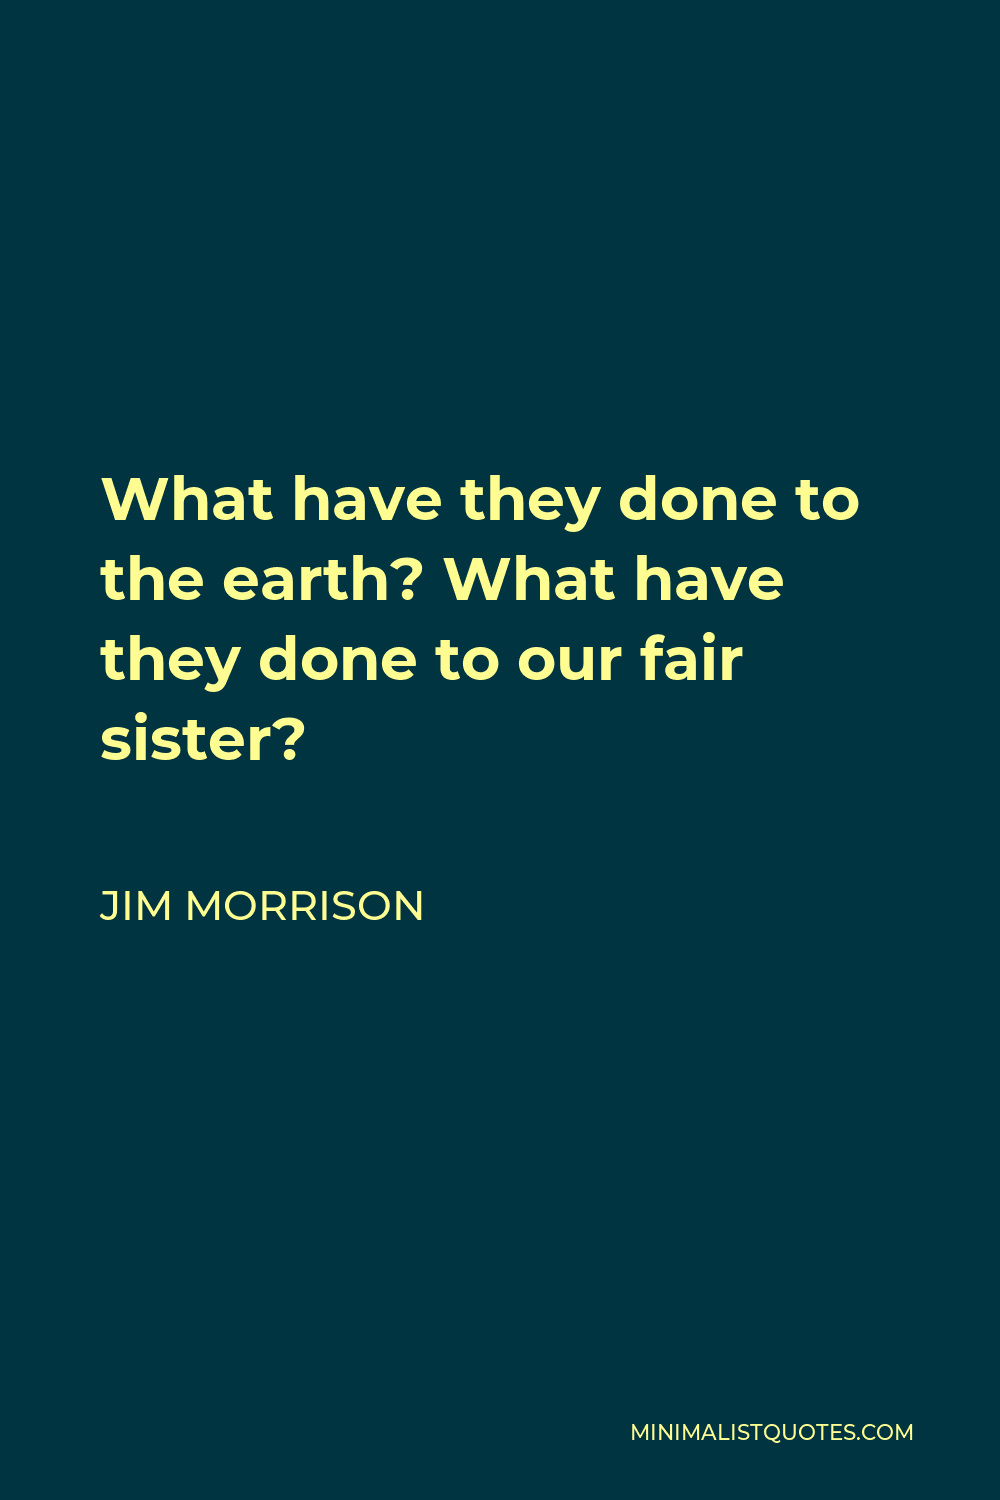 Jim Morrison Quote - What have they done to the earth? What have they done to our fair sister?